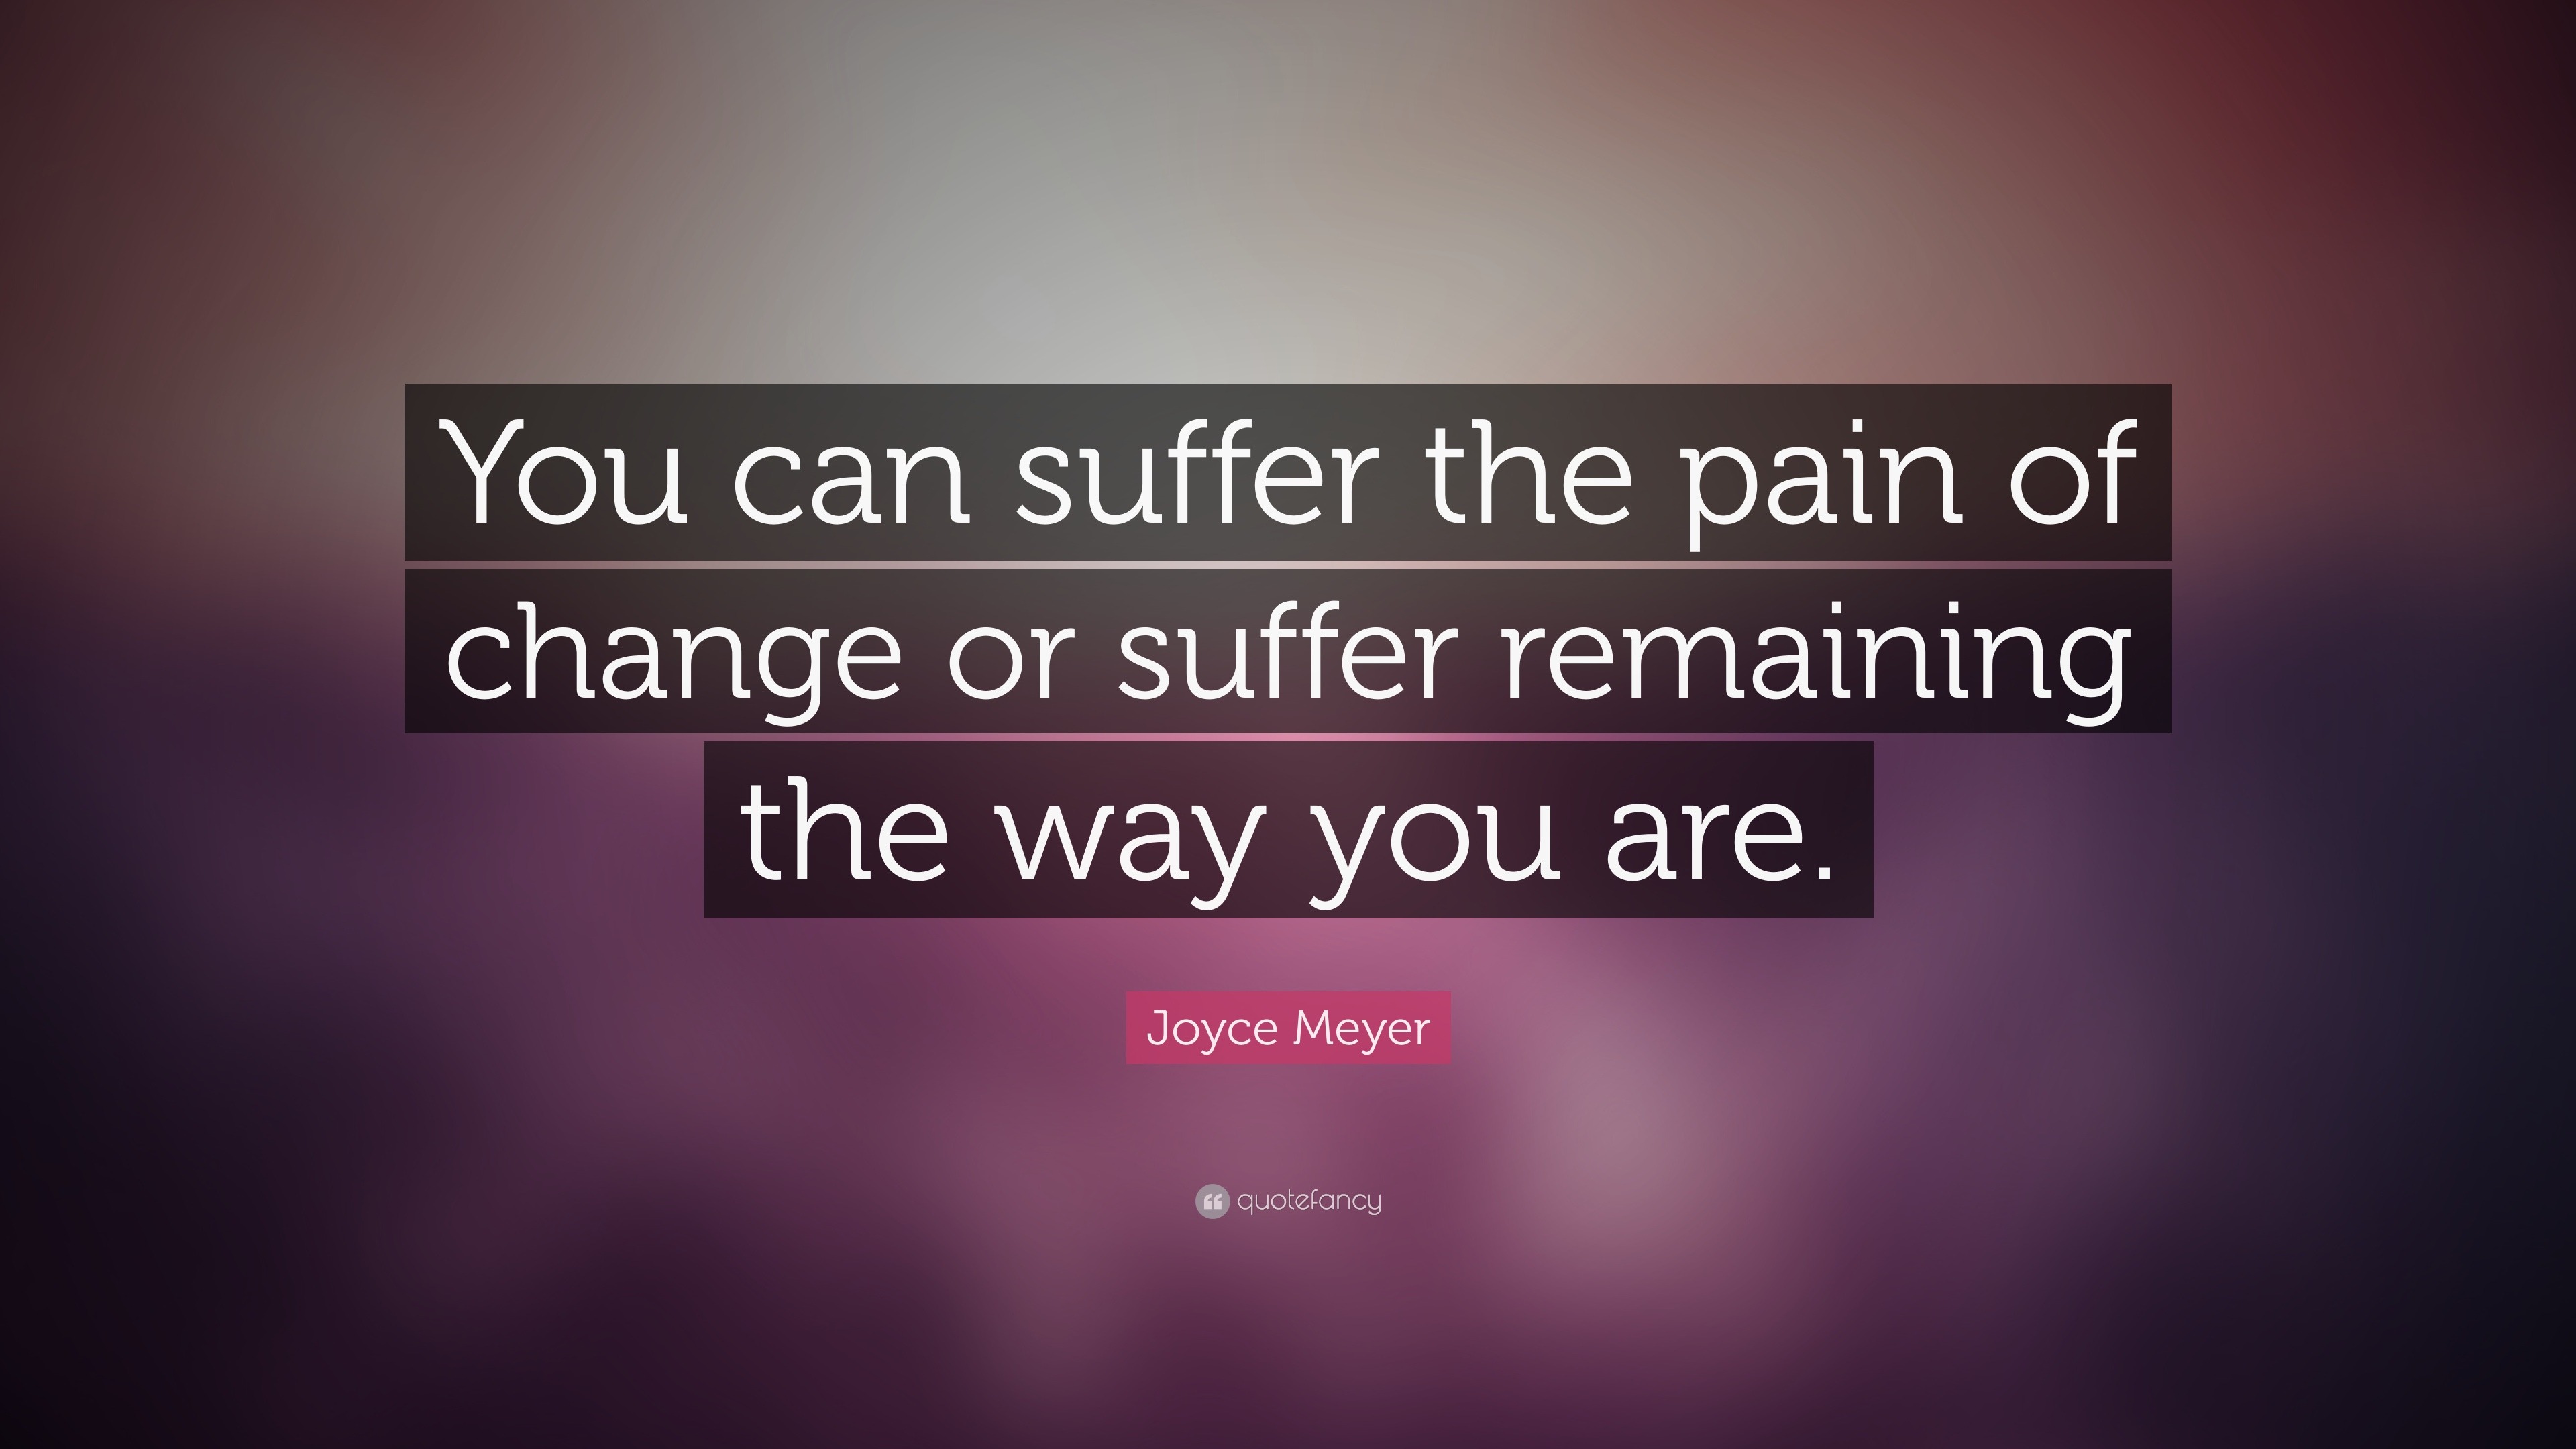 Joyce Meyer Quote: “You can suffer the pain of change or suffer